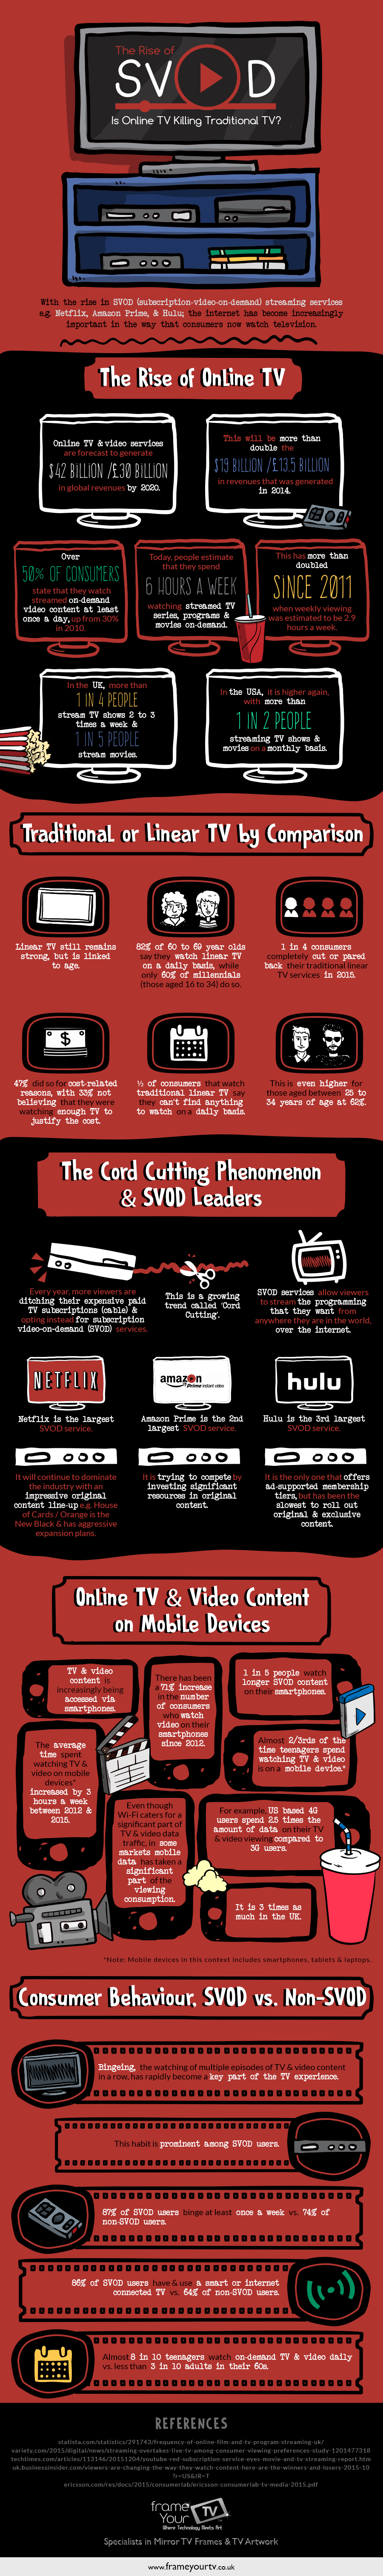 Is Online TV Killing Traditional TV? INFOGRAPHIC Home Automation Blog